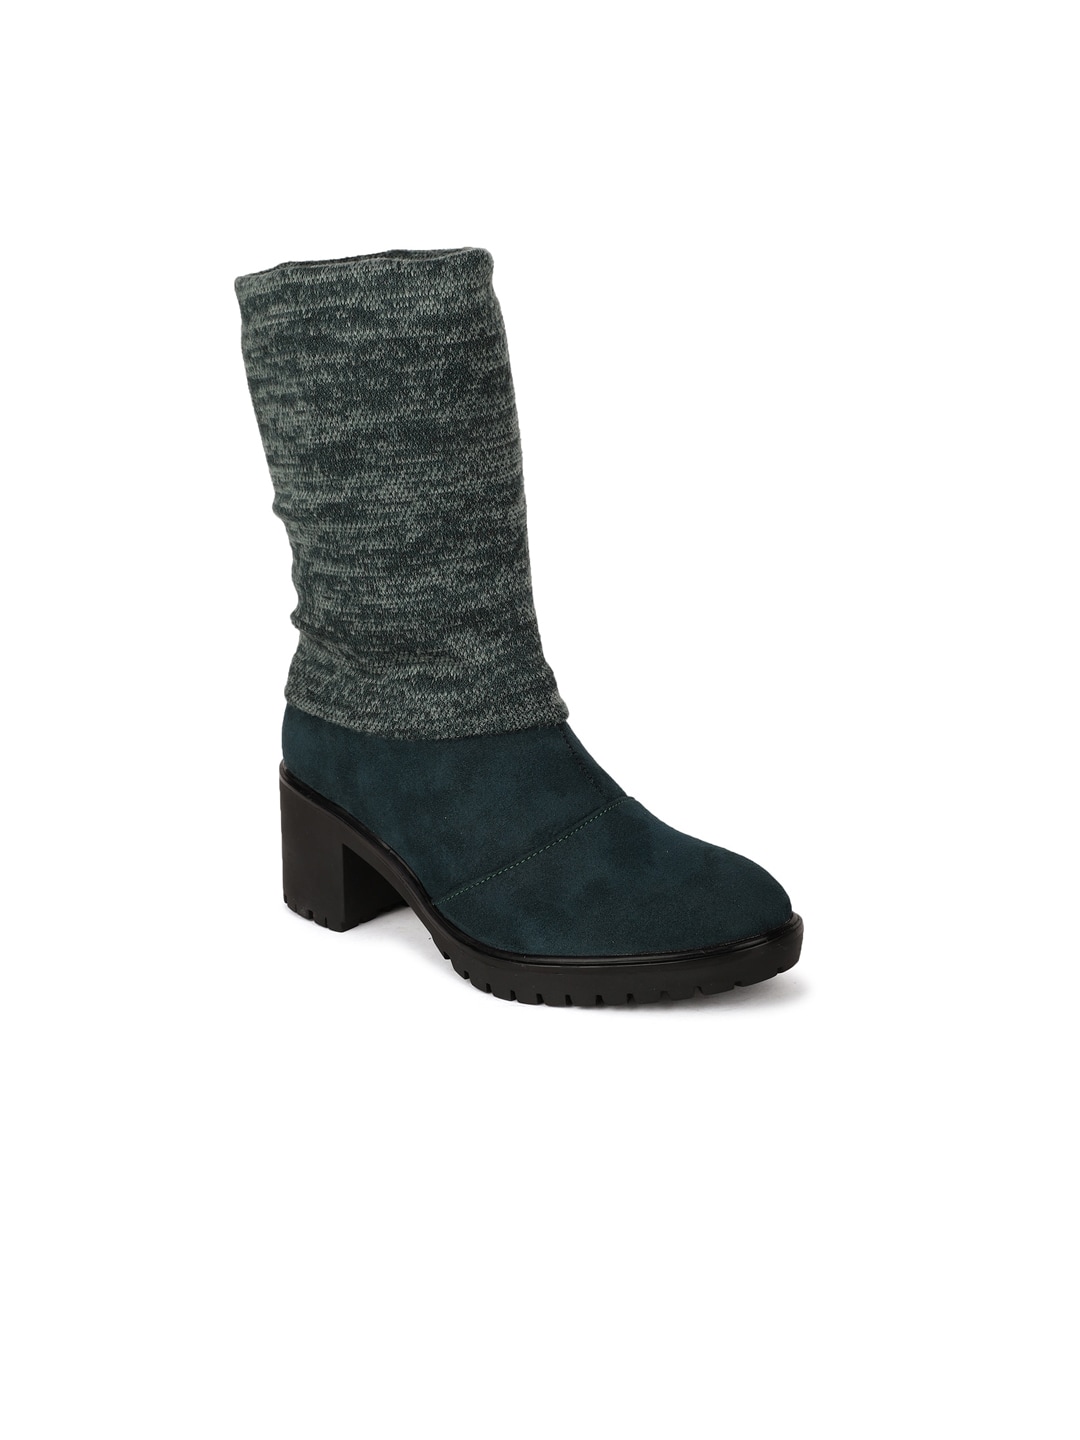 Bruno Manetti Green Suede Block Heeled Boots Price in India